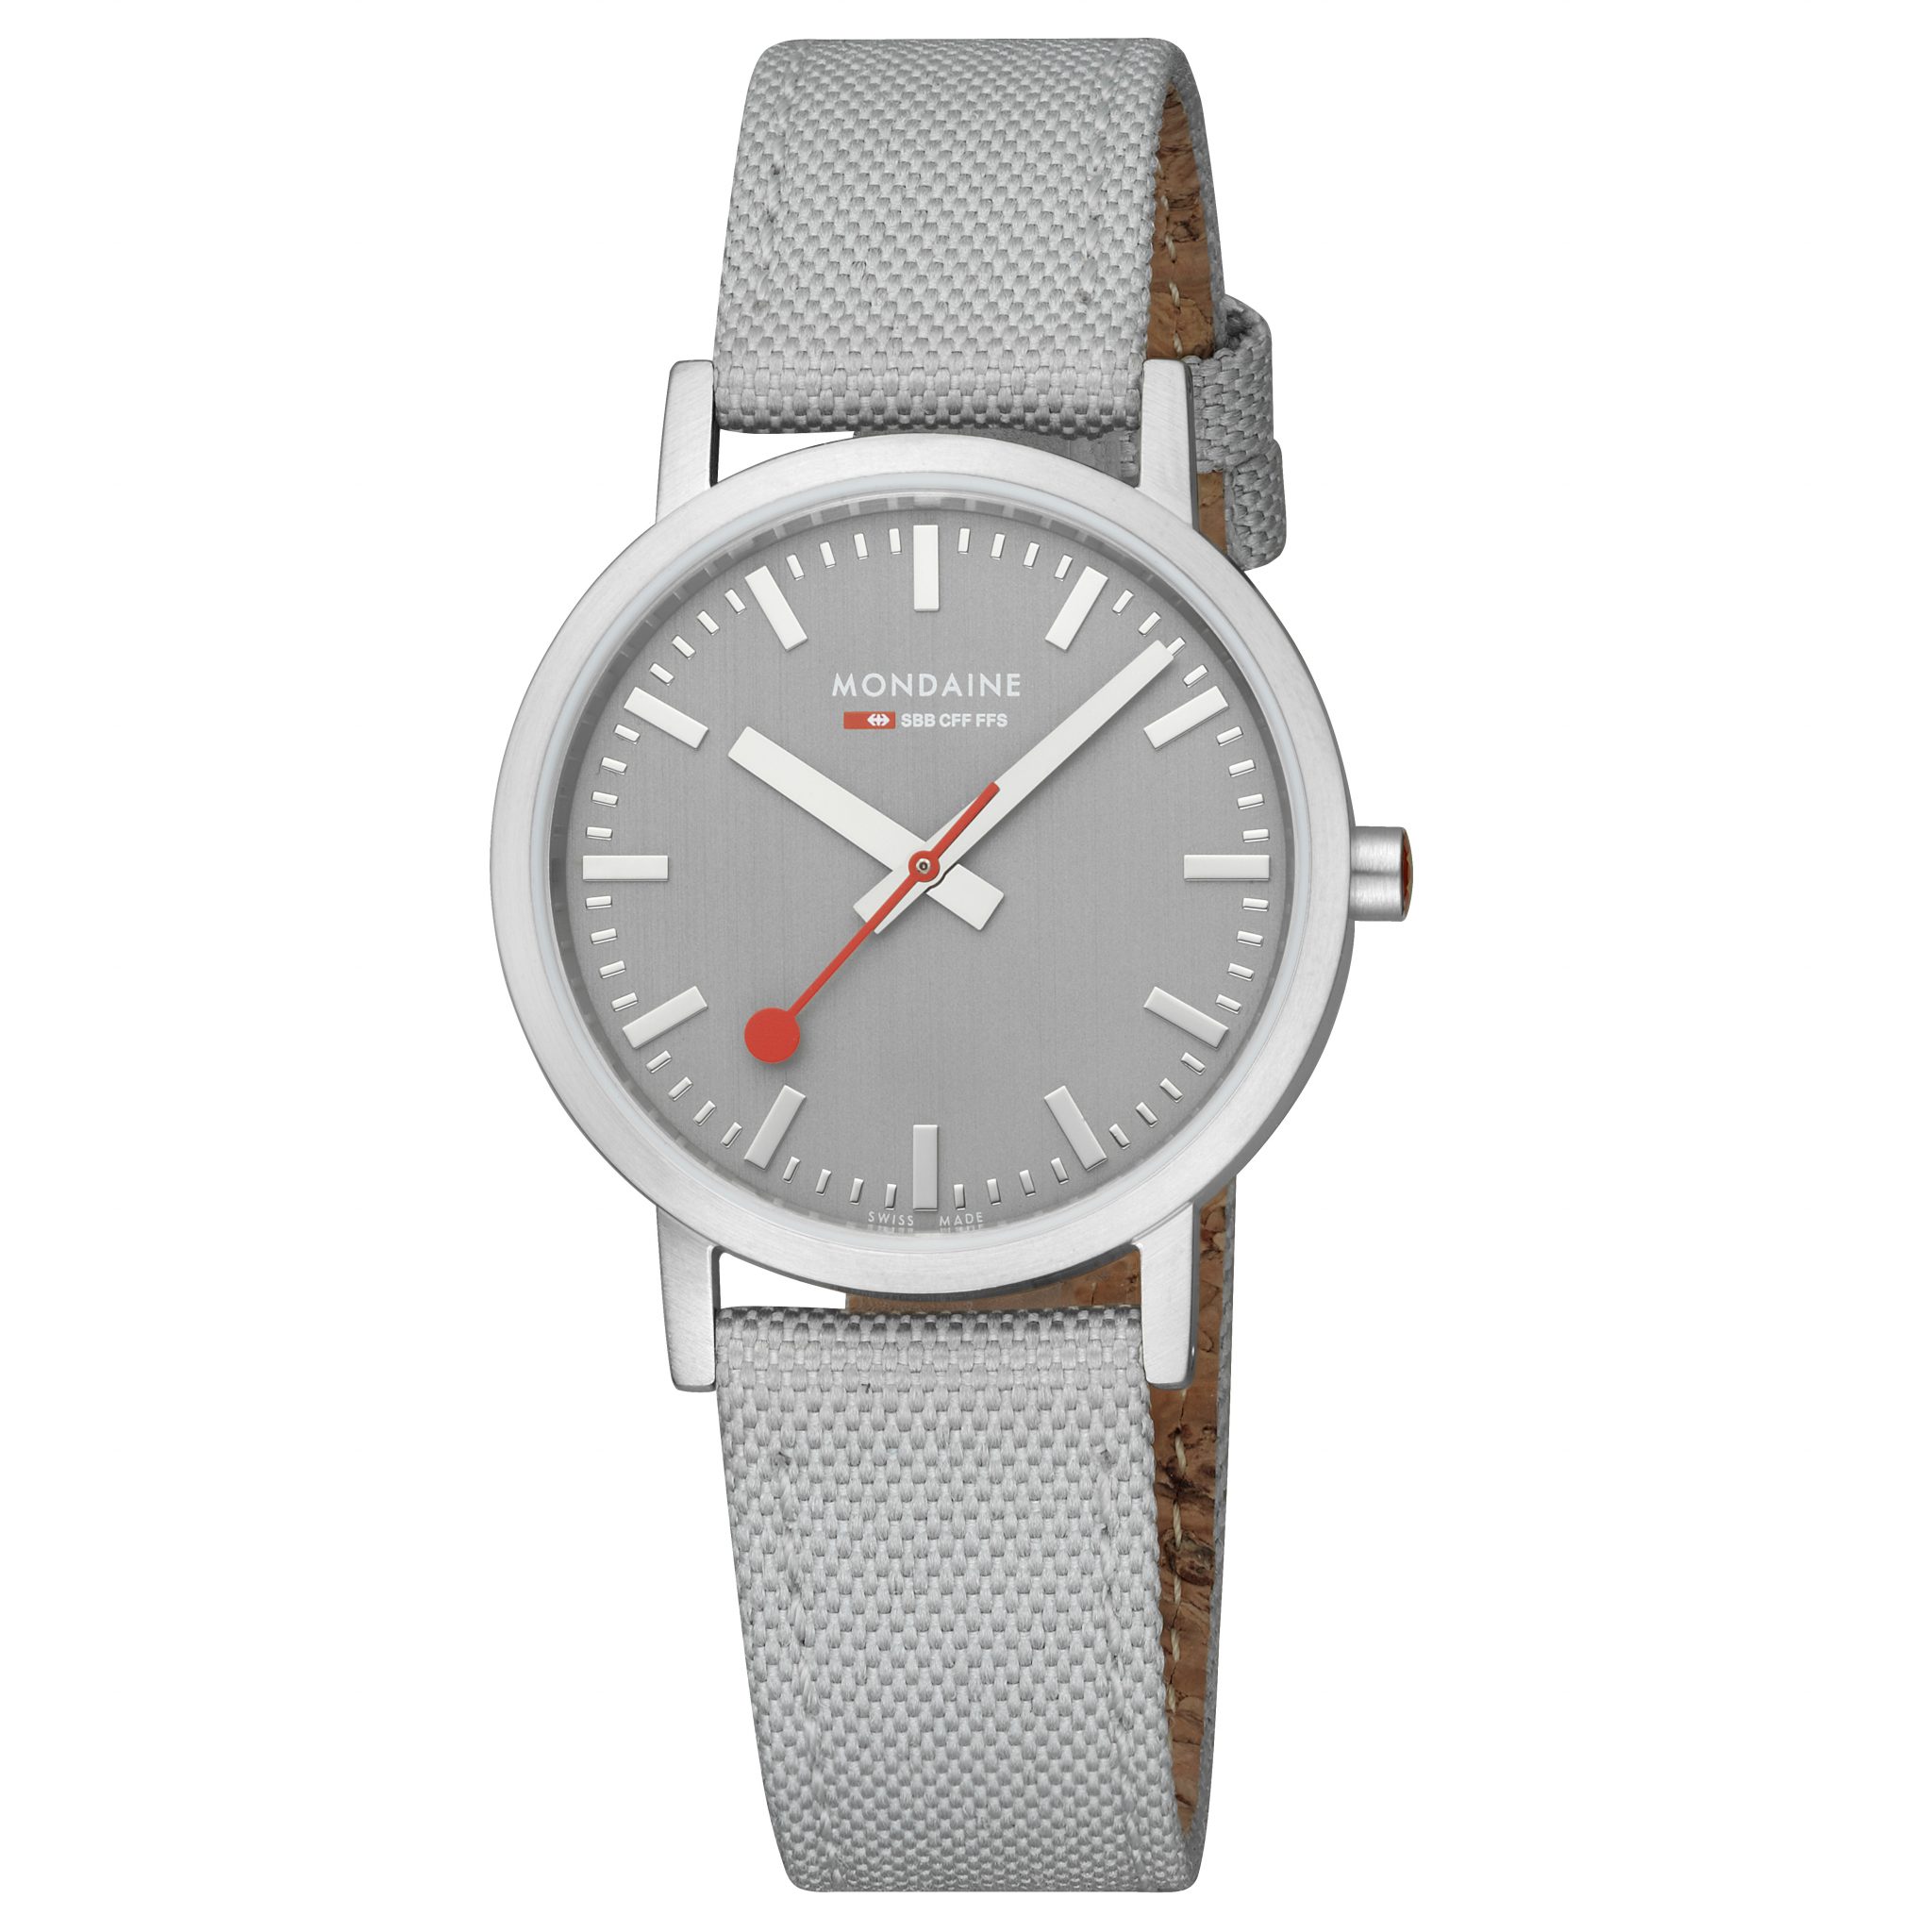 Mondaine goes back to nature for its Spring/Summer SBB Classic